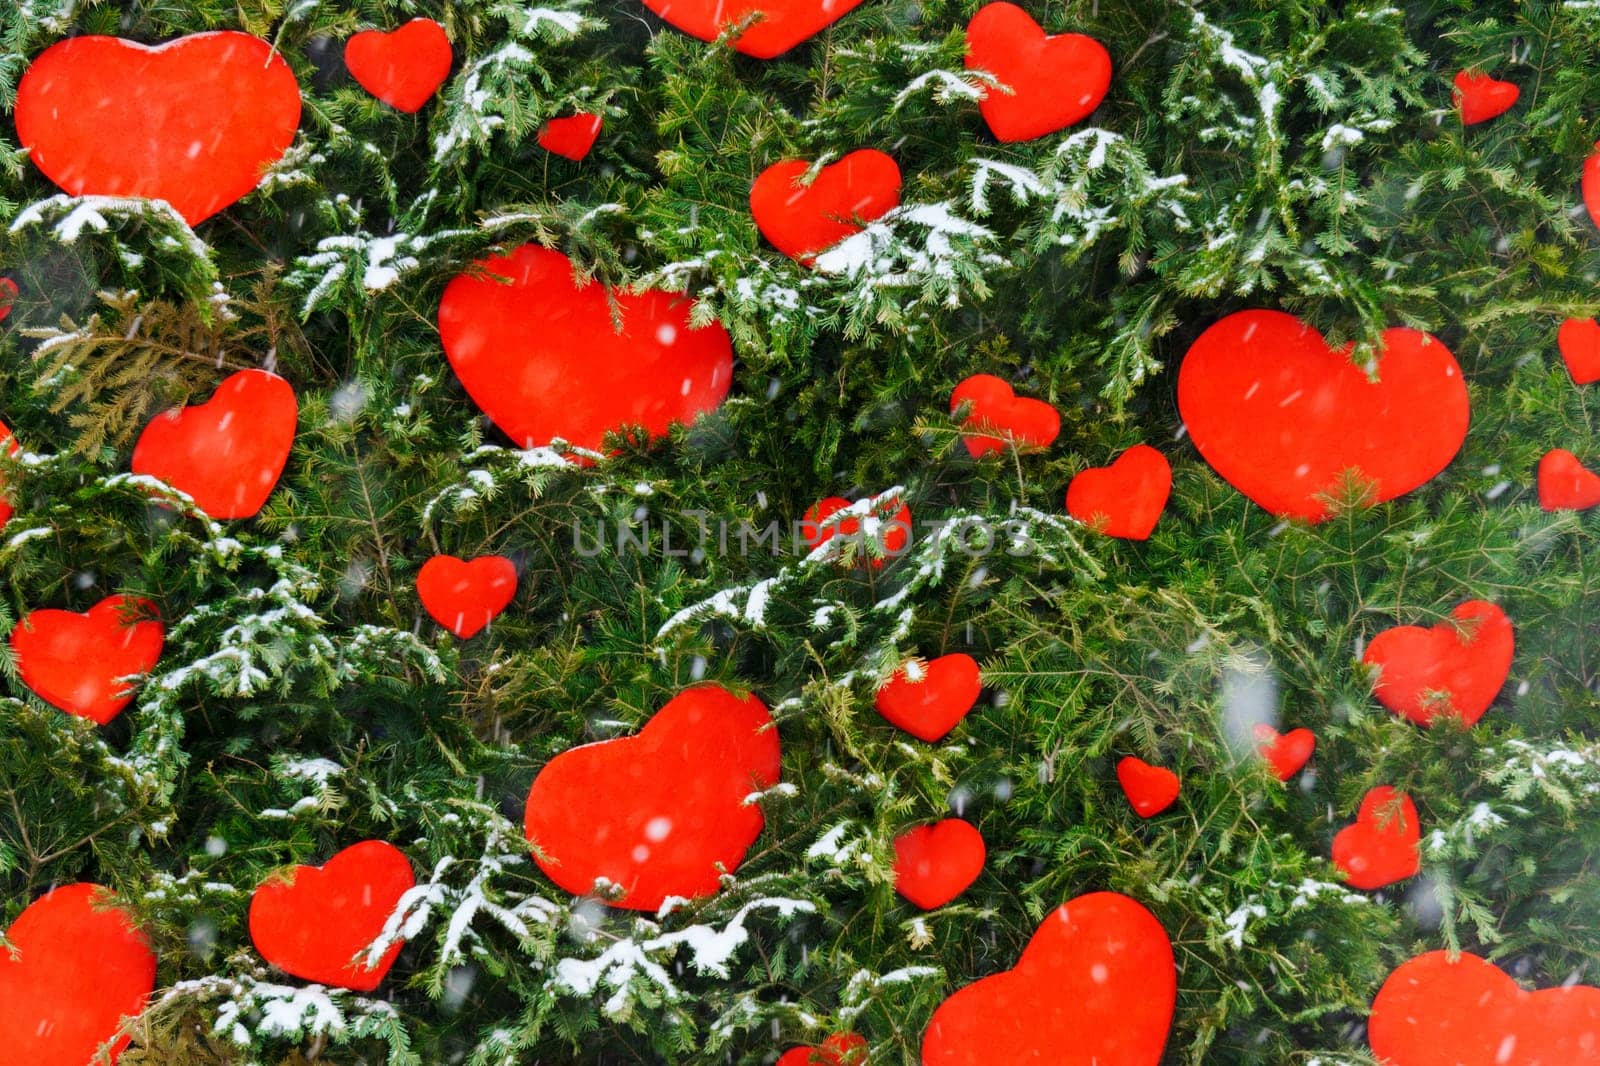 Vibrant red hearts are playfully scattered across the snowy landscape, creating a stunning contrast in colors and evoking a sense of warmth and joy.